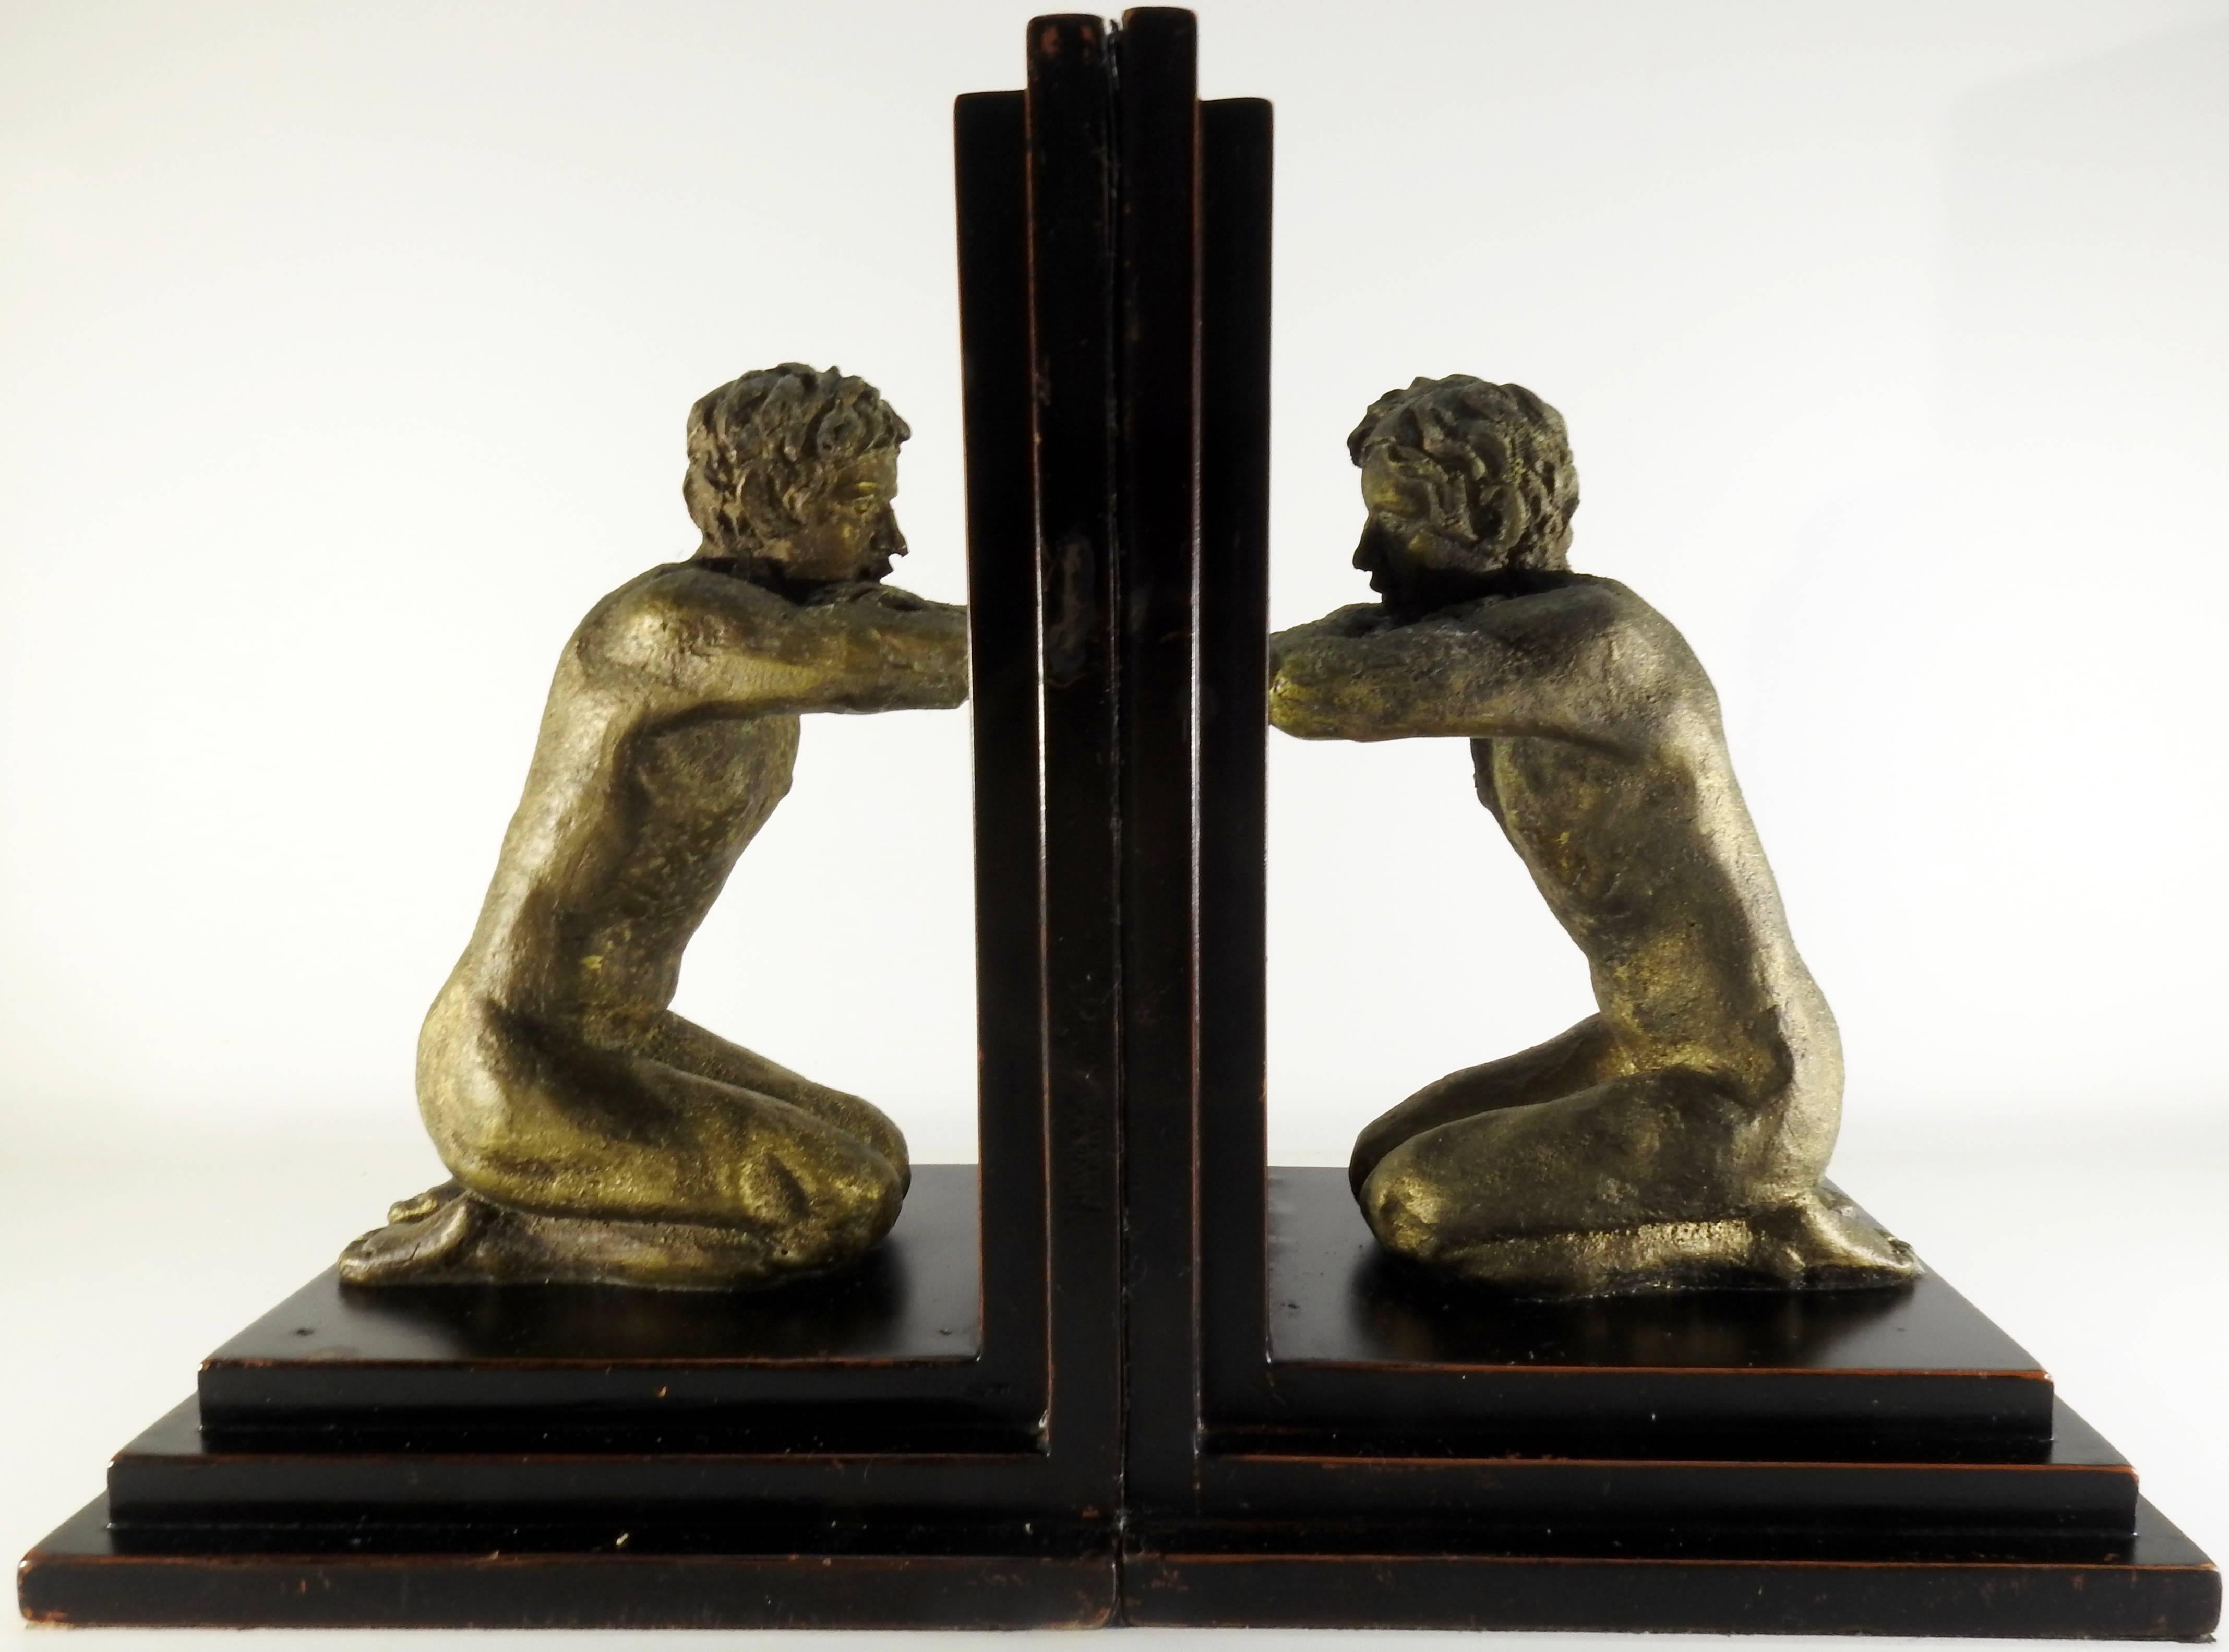 A pair of kneeling men are gazing in their respective mirrors in this pair of midcentury bookends. The nude men have rustic details and are finished in an antique gold color. They are mounted on stair step wooden bases. The bottoms and sides are